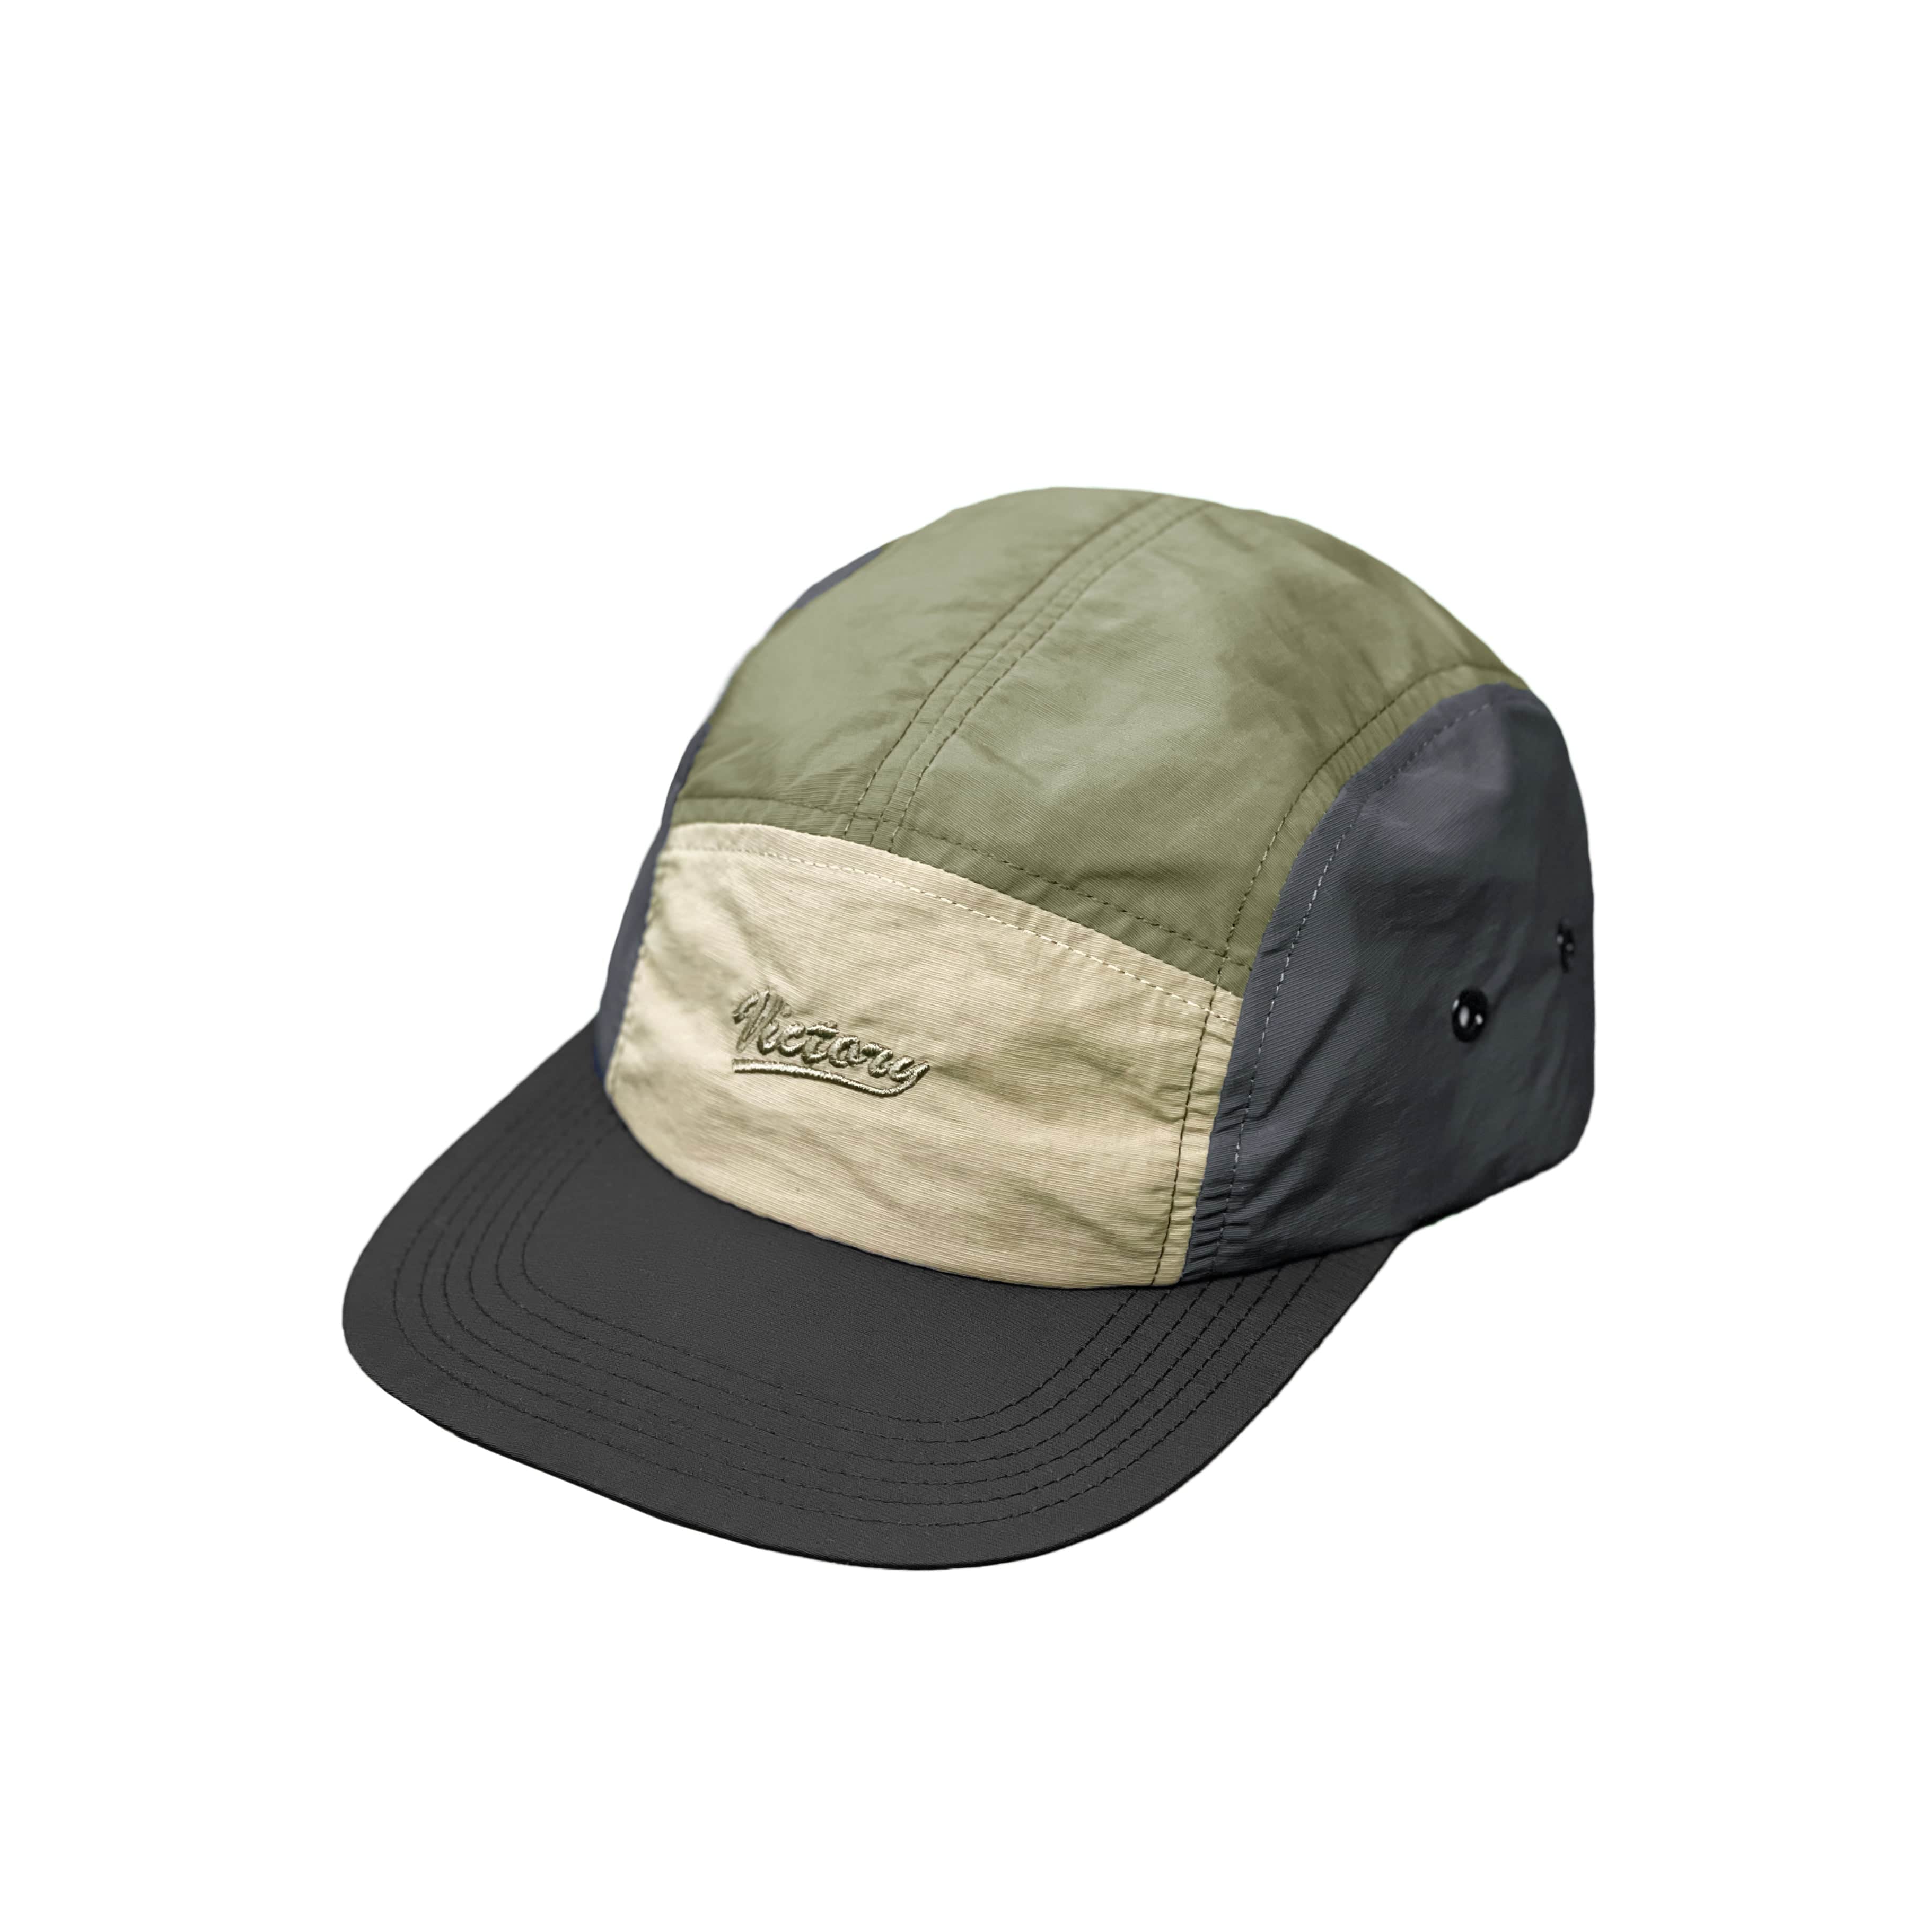 Lightweight vintage outdoor style quick-dry & water-resistant nylon 5-panel camp cap. Colour block panels & soft peak style